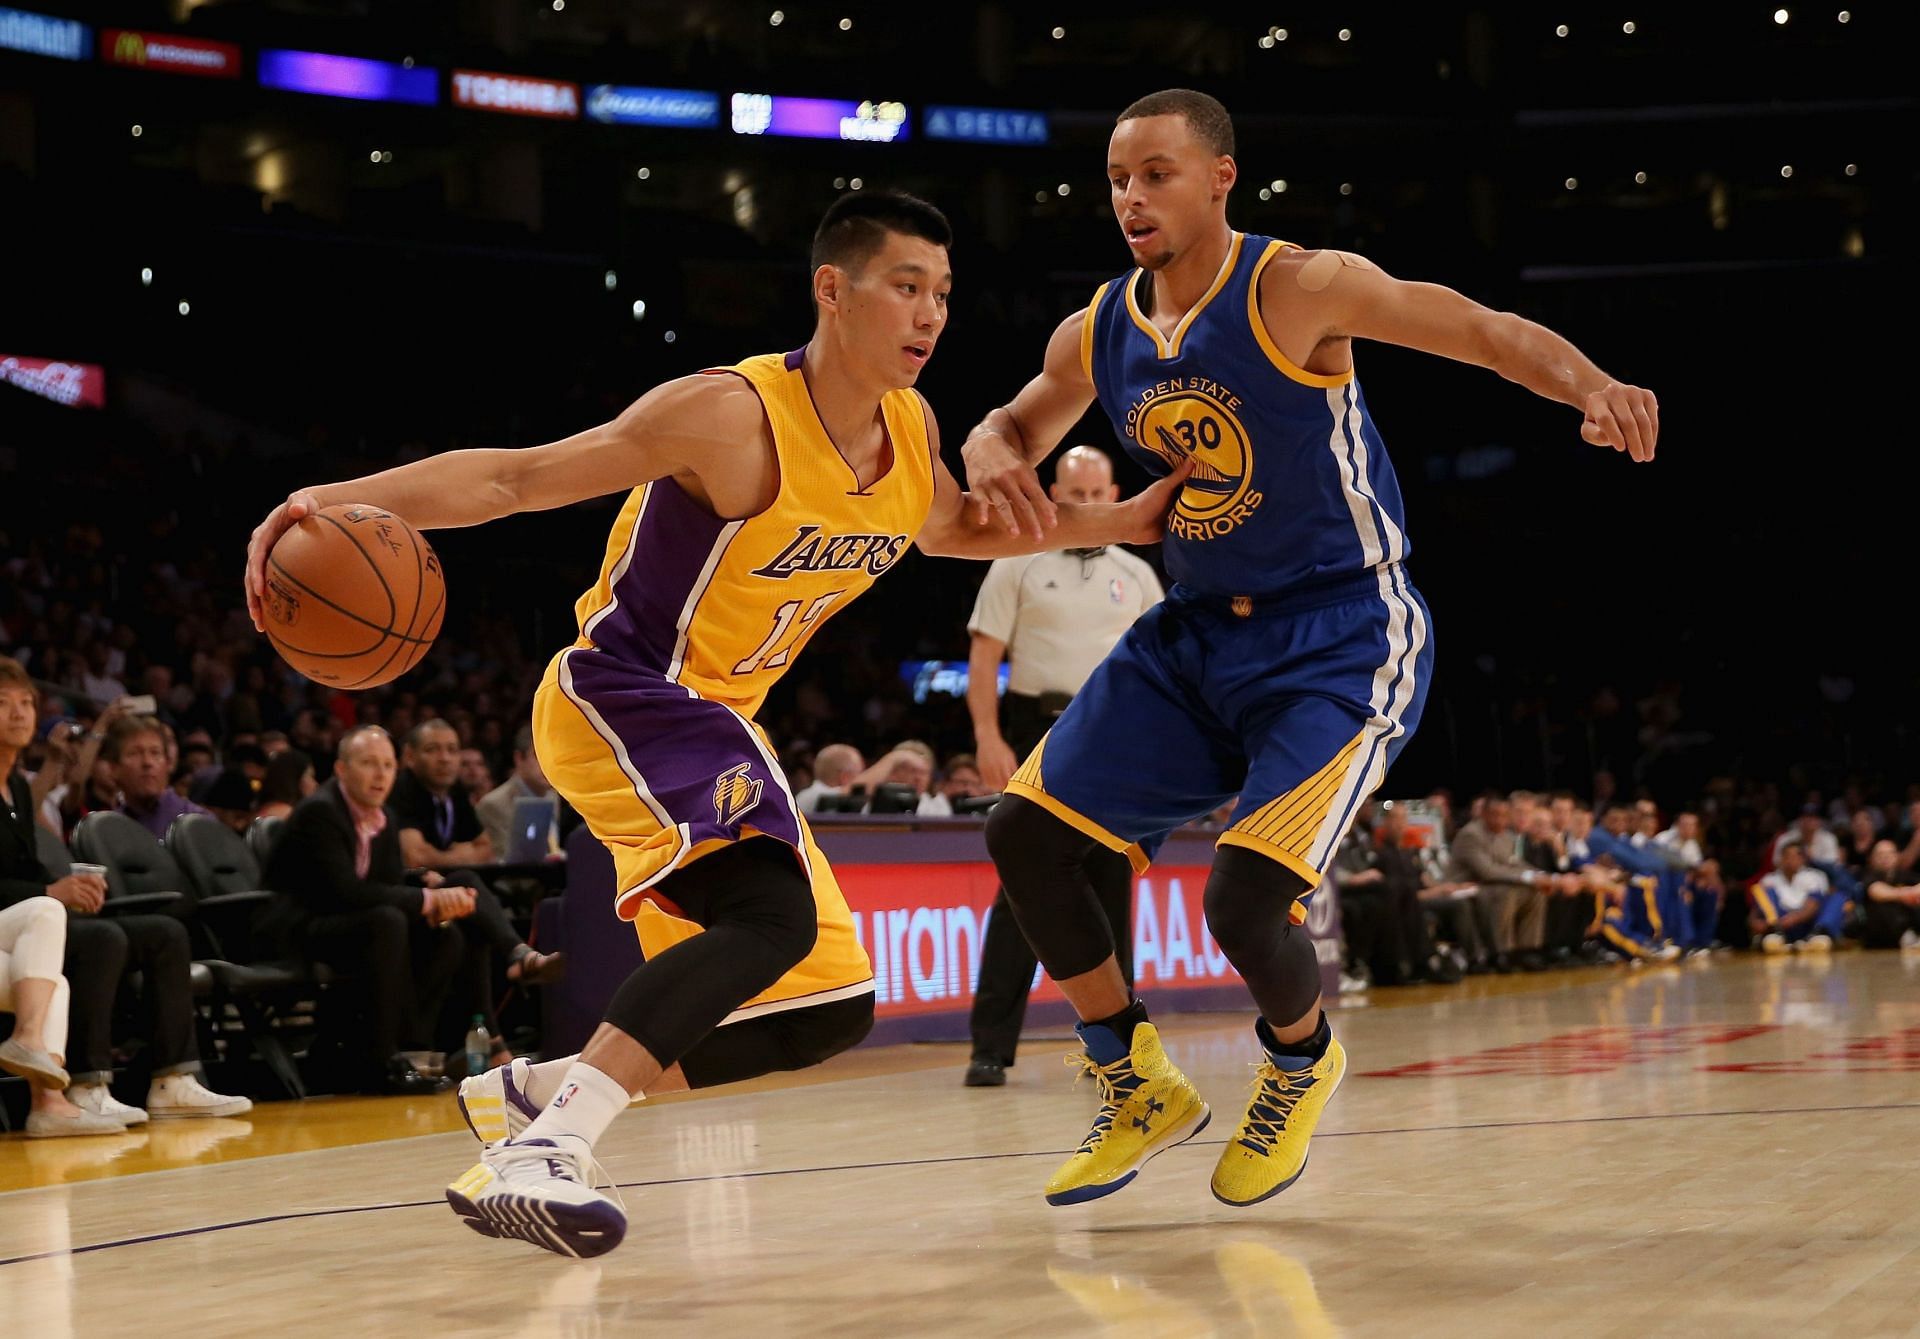 Jeremy Lin and Steph Curry were former teammates with the Golden State Warriors